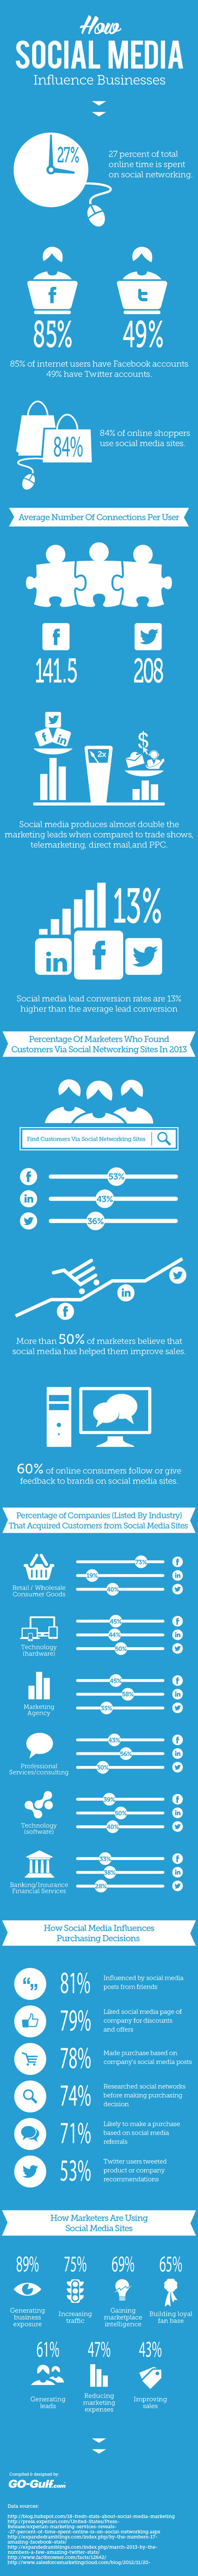 How Social Media Influence Businesses | Great #Infographic from Visual.ly | SocialMedia_me | Scoop.it